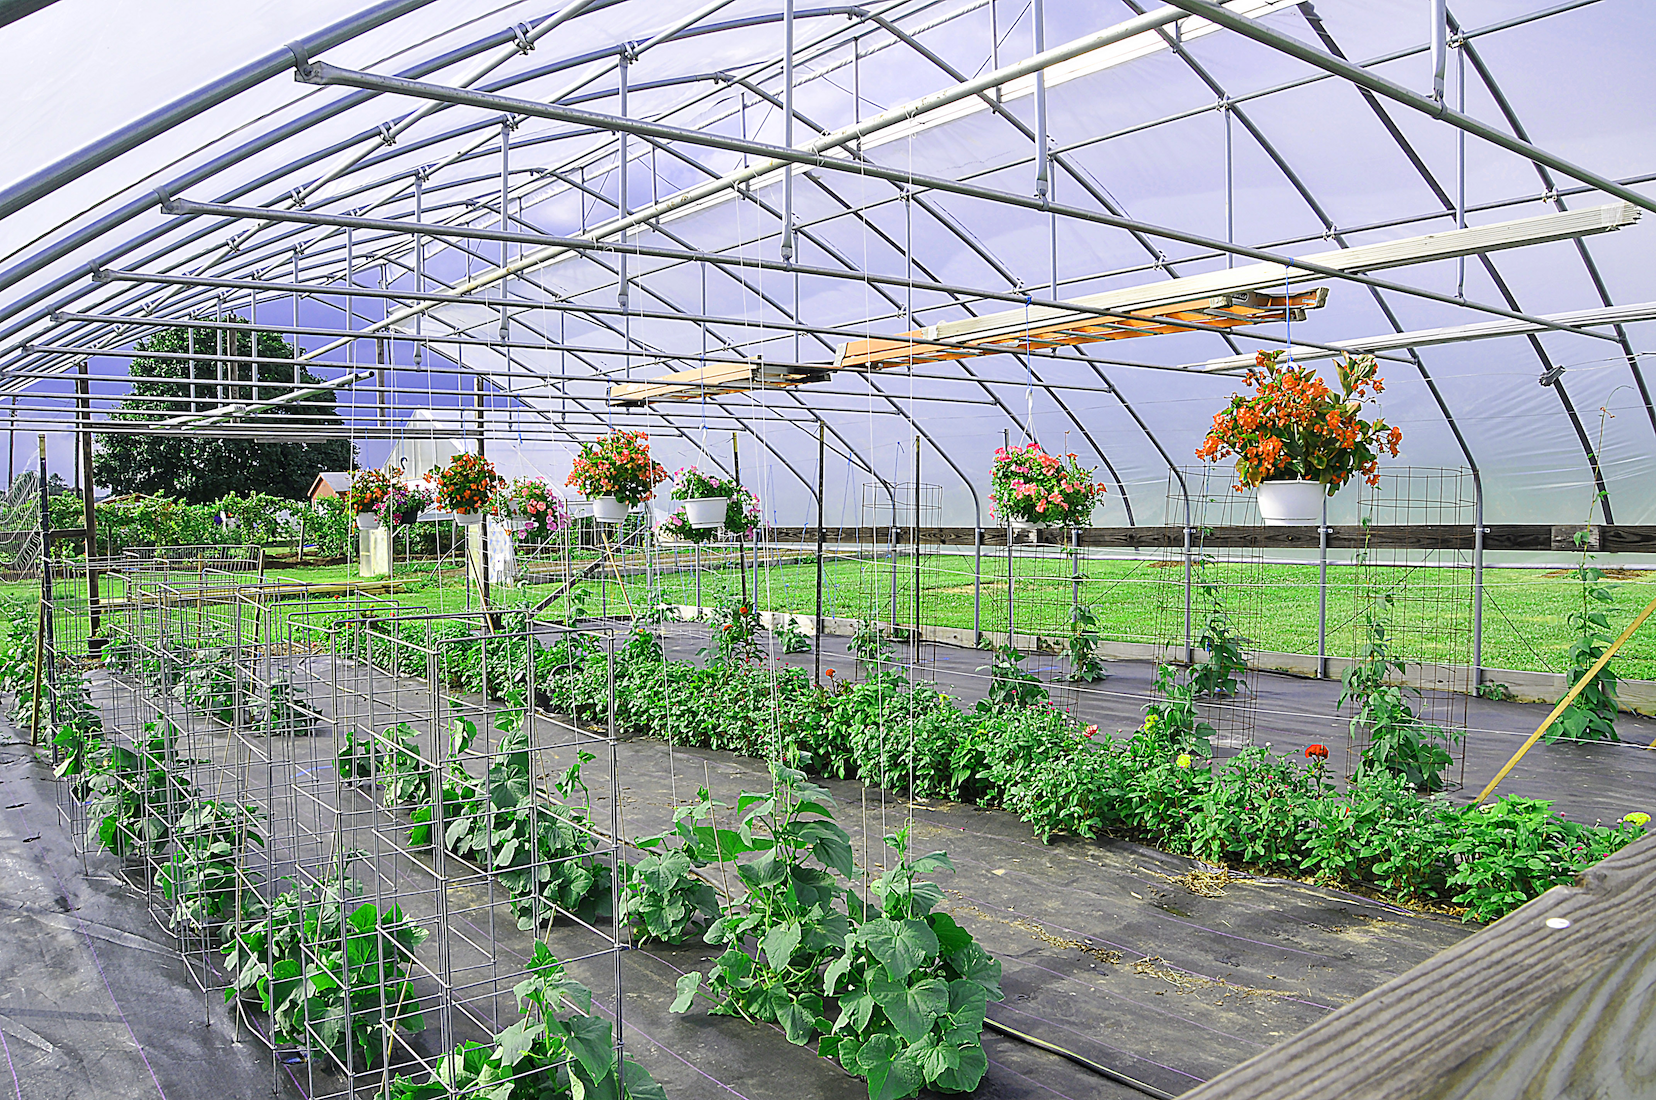 High tunnels, like this one at DSU's Outreach and Research Center, help agriculture producers apply precise treatments to and extend the growing season for crops. Artificial intelligence further optimizes crop growth by providing farmers with real-time data for planning purposes.